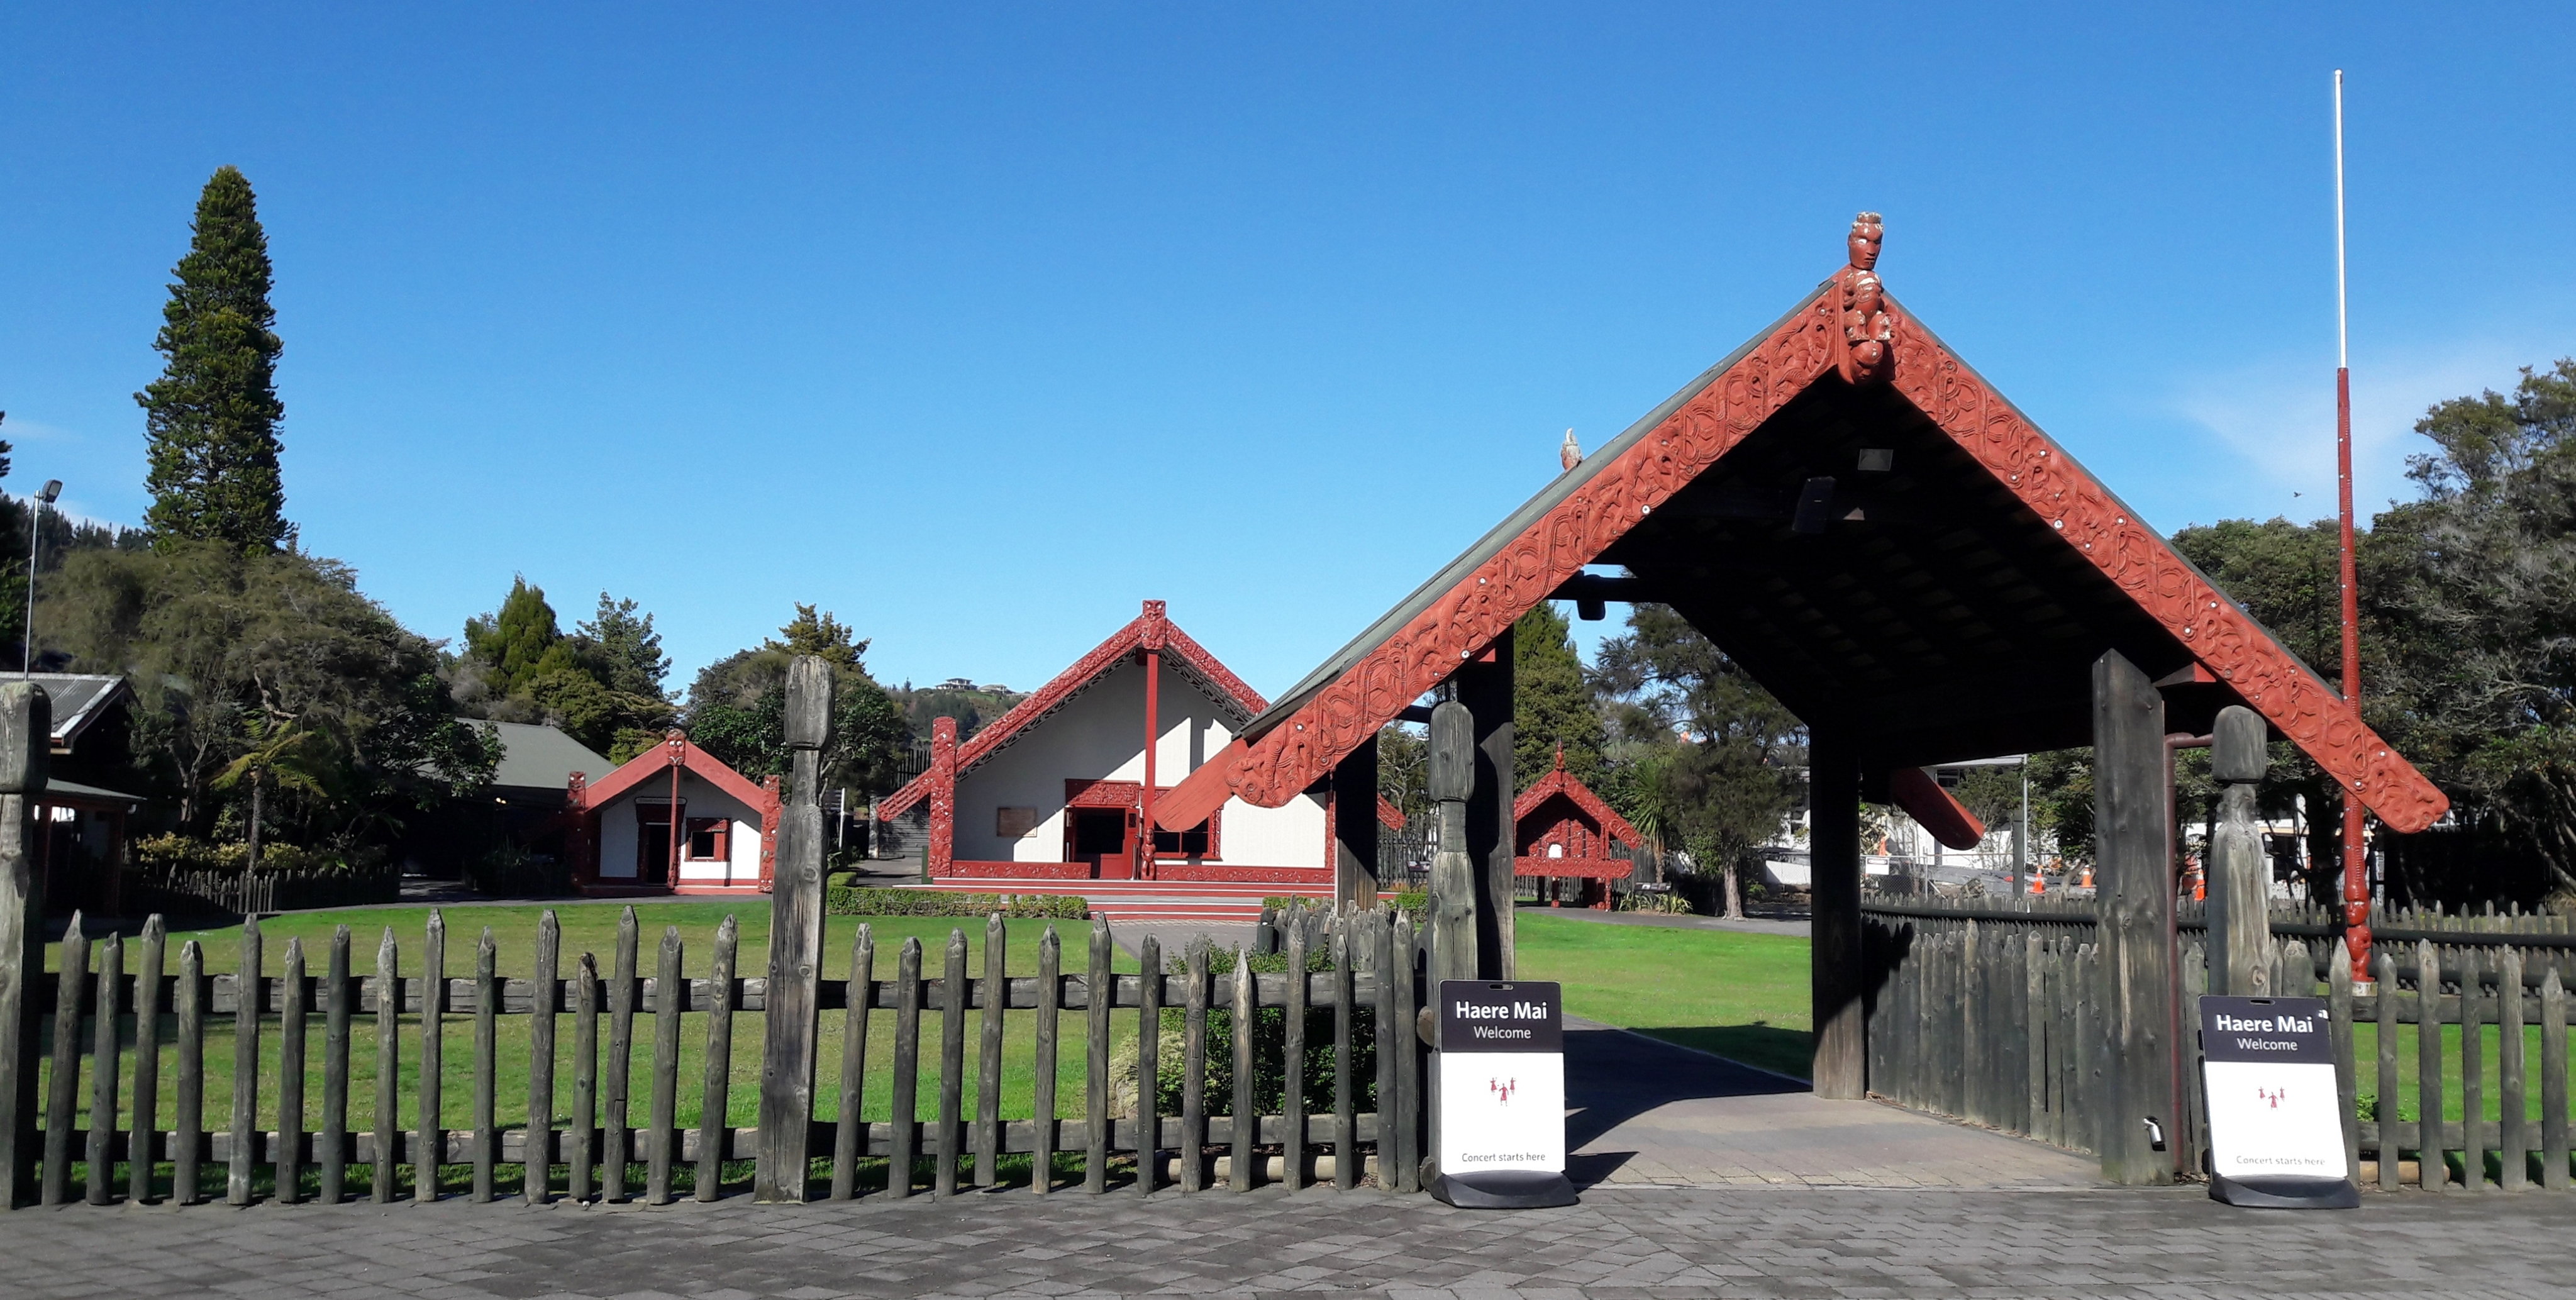 Te Puia Pa- site of an ancient fortified village with "Rotowhio Marae" on the inset